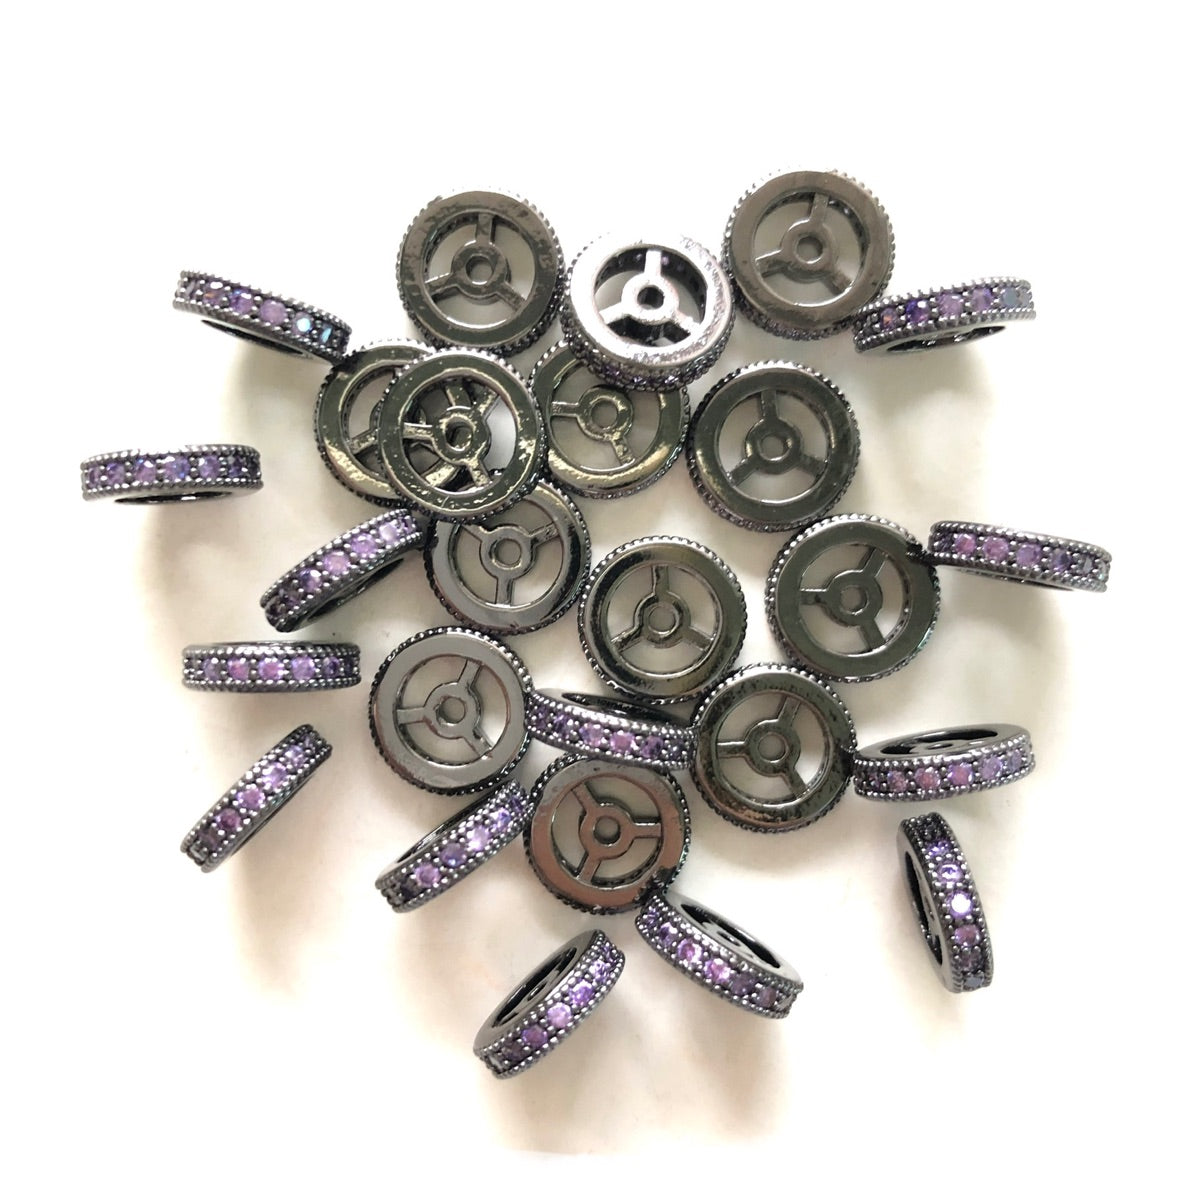 20pcs/lot 9.6/12mm Purple CZ Paved Wheel Rondelle Spacers Black CZ Paved Spacers New Spacers Arrivals Rondelle Beads Charms Beads Beyond